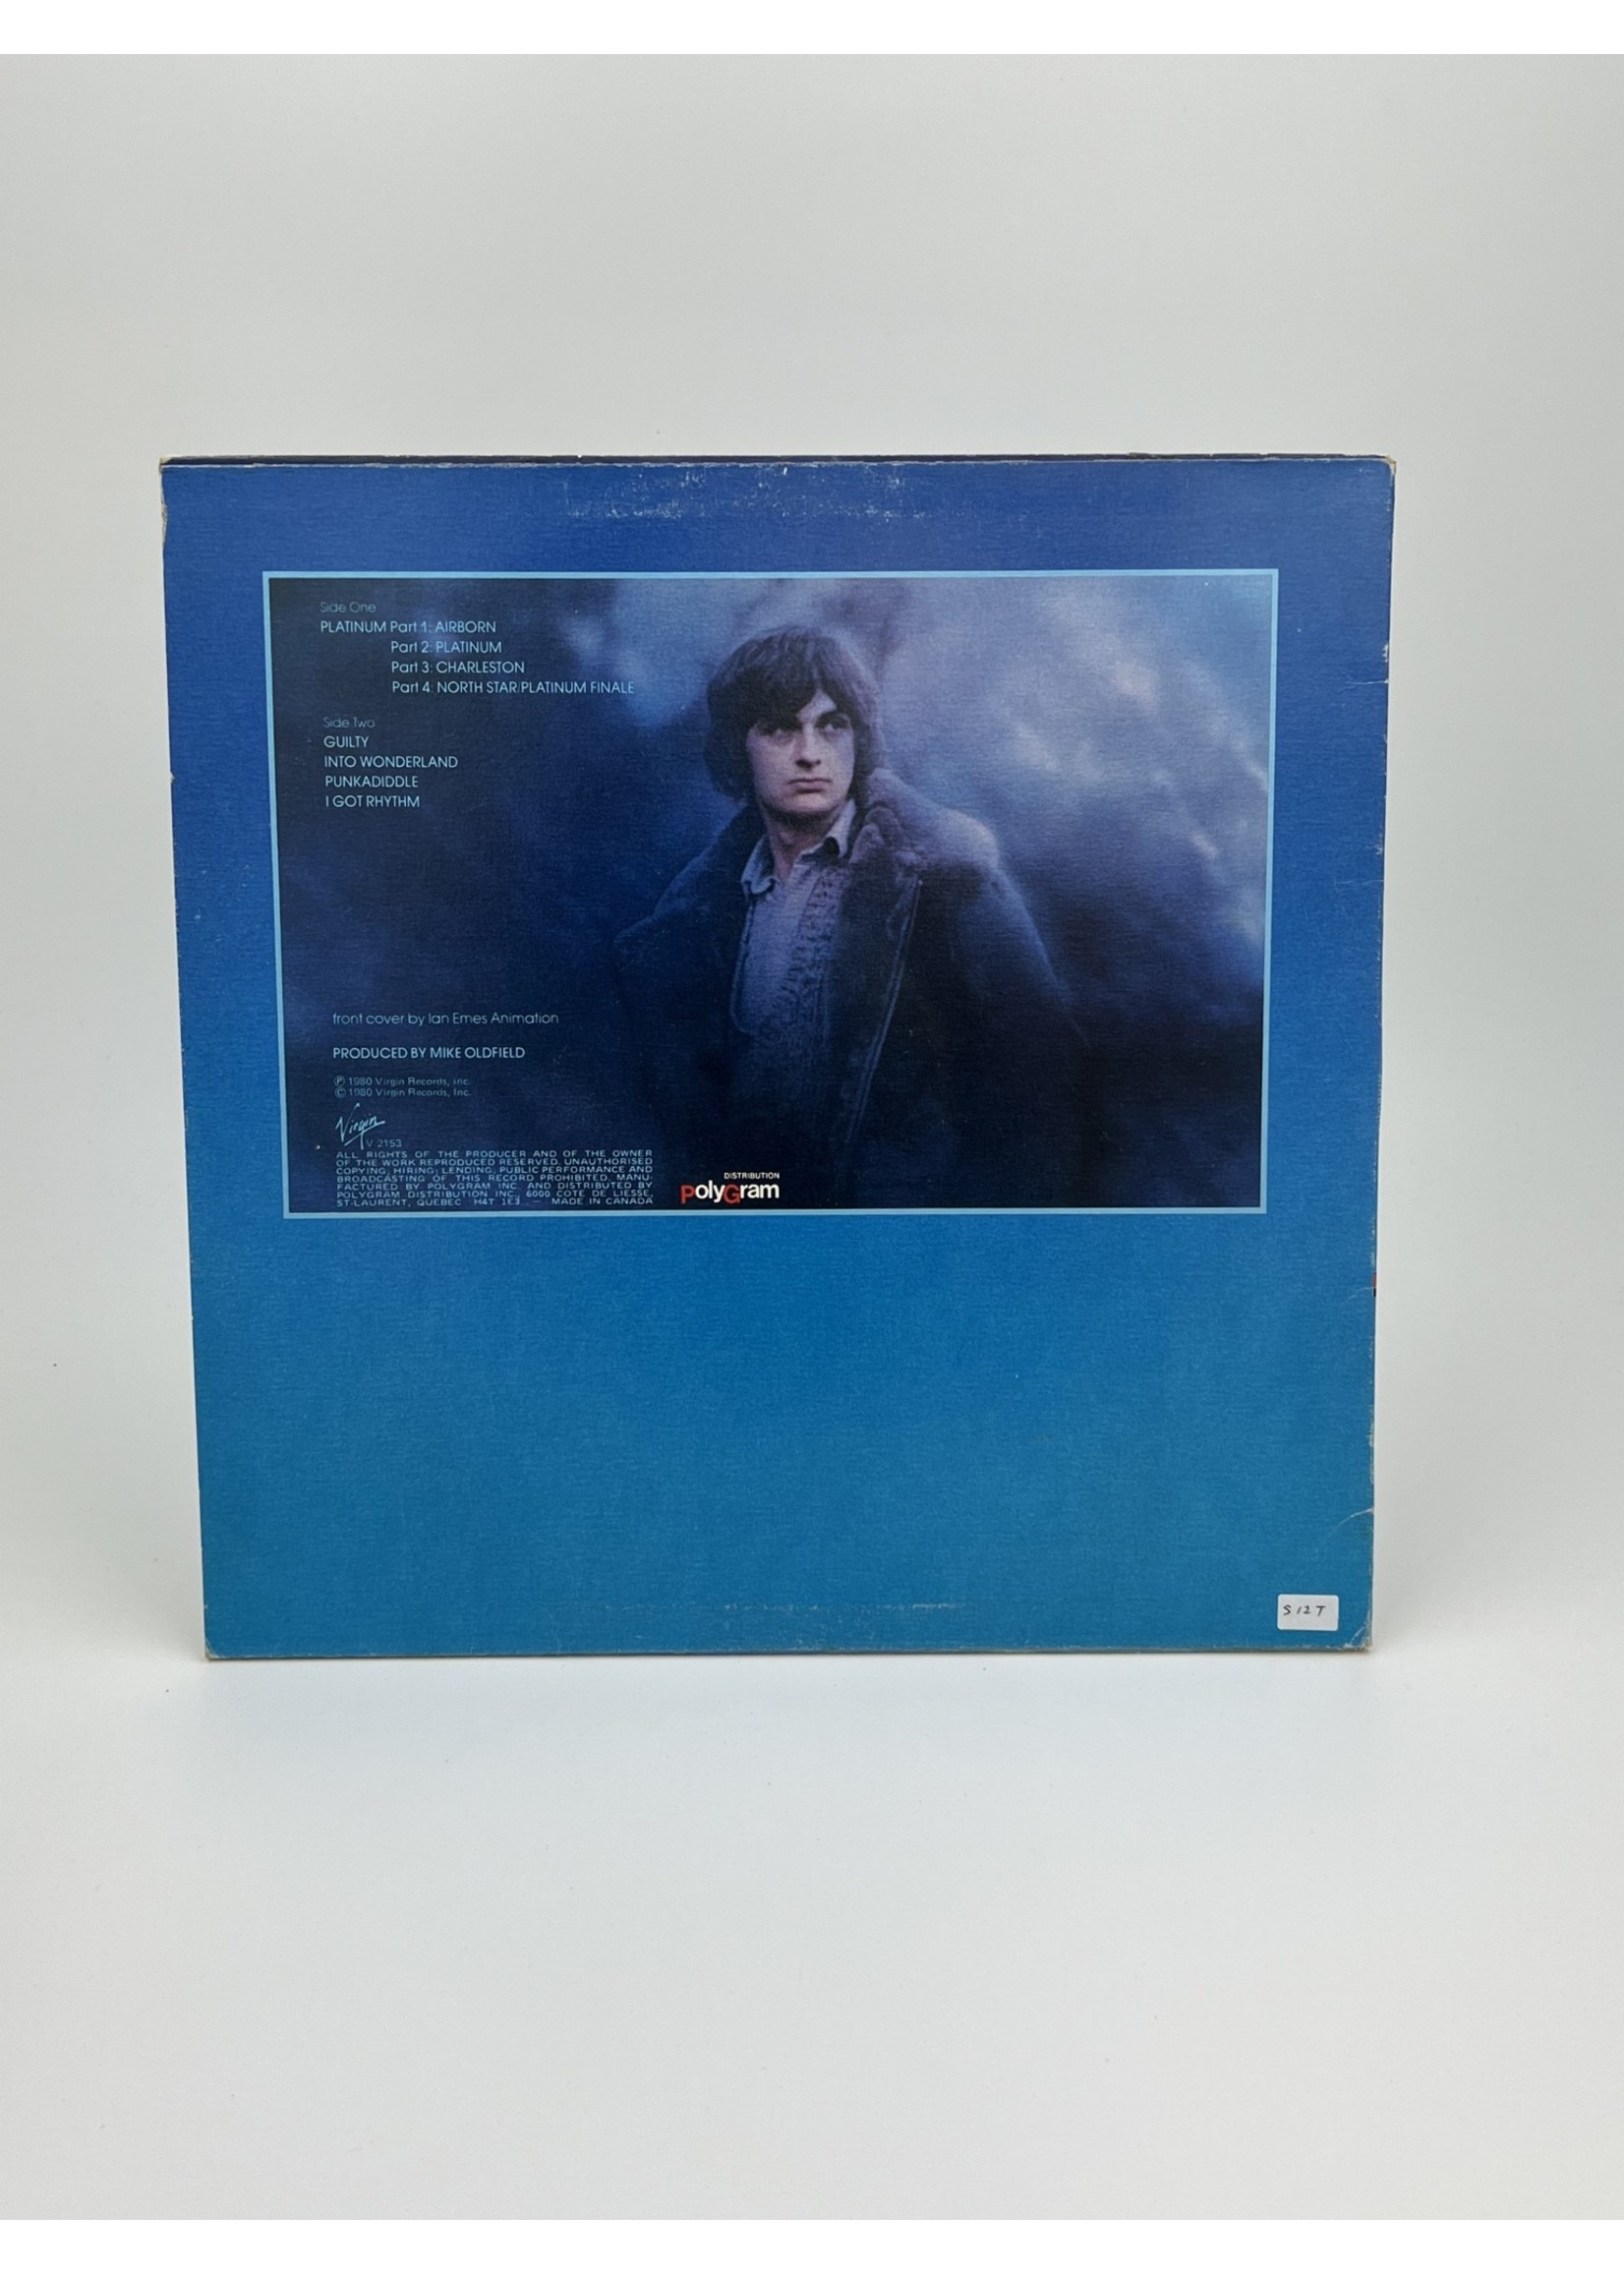 LP Mike Oldfield Airborn 2 LP Record